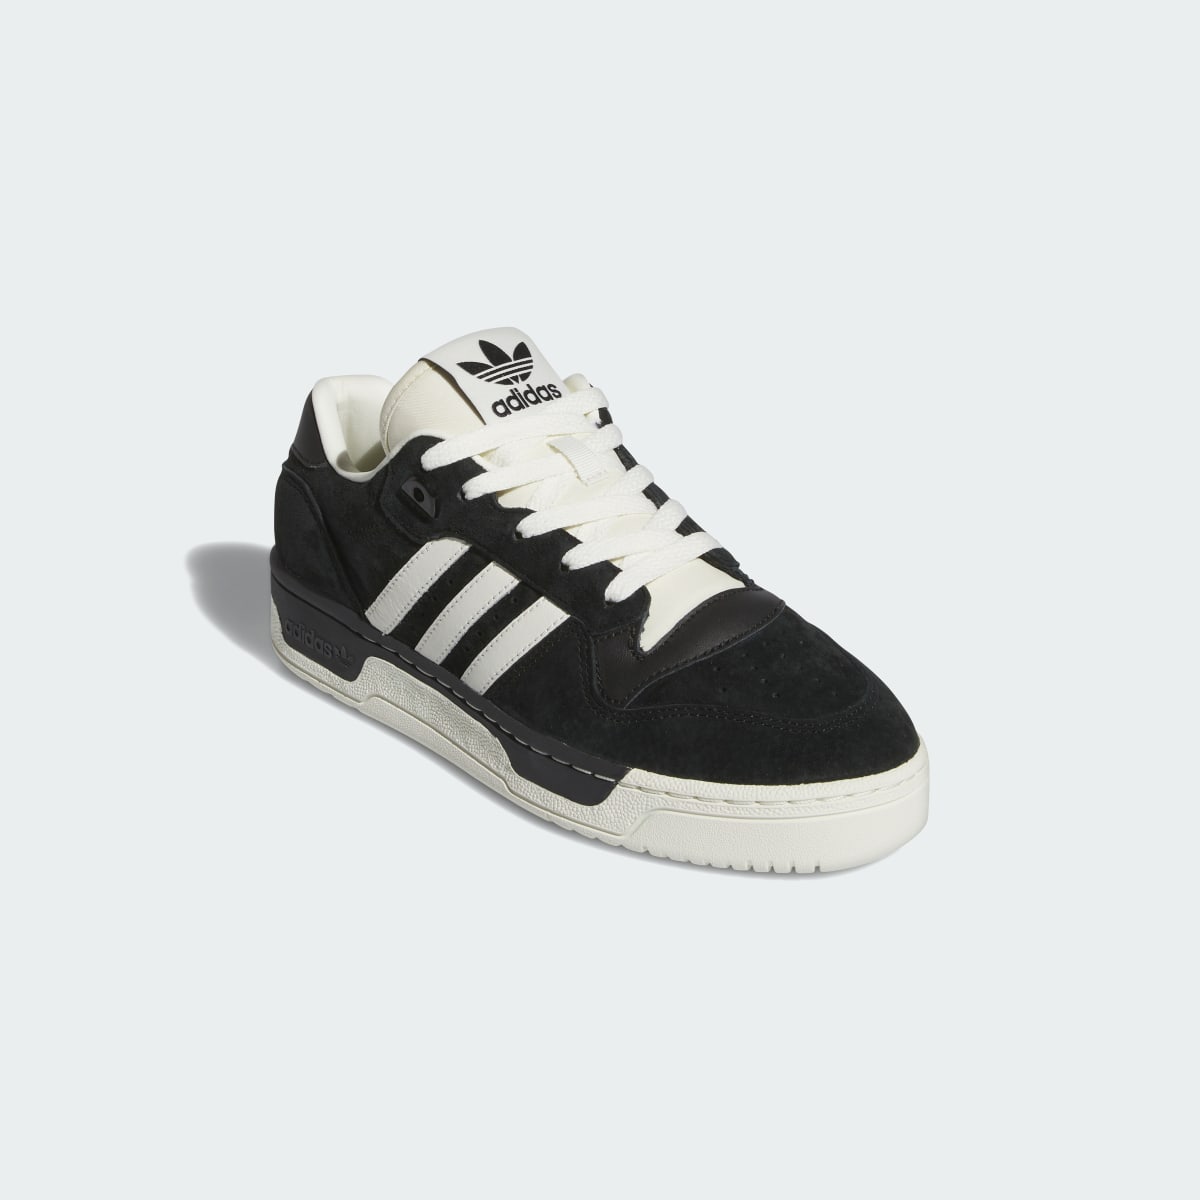 Adidas Rivalry Low Shoes. 4